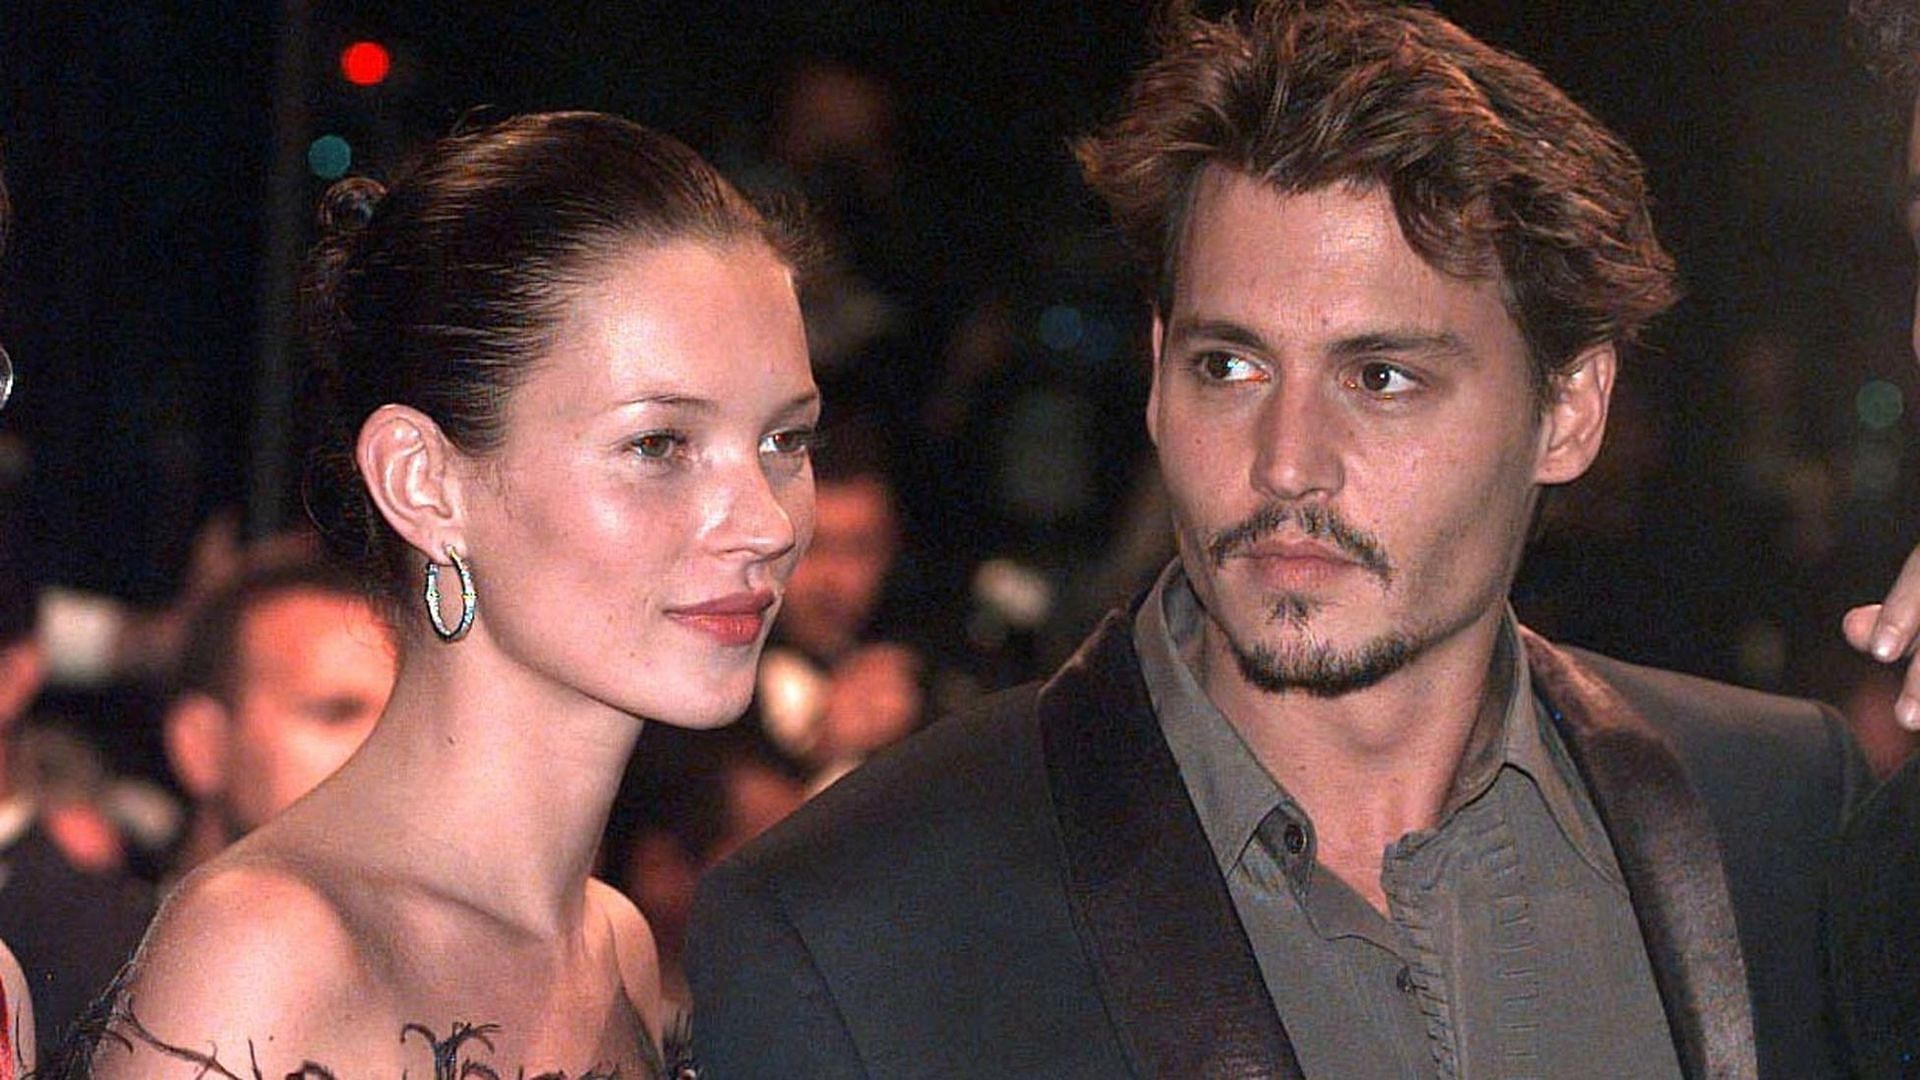 Kate Moss and Johnny Depp during their relationship (Image via PA Images/Getty Images)